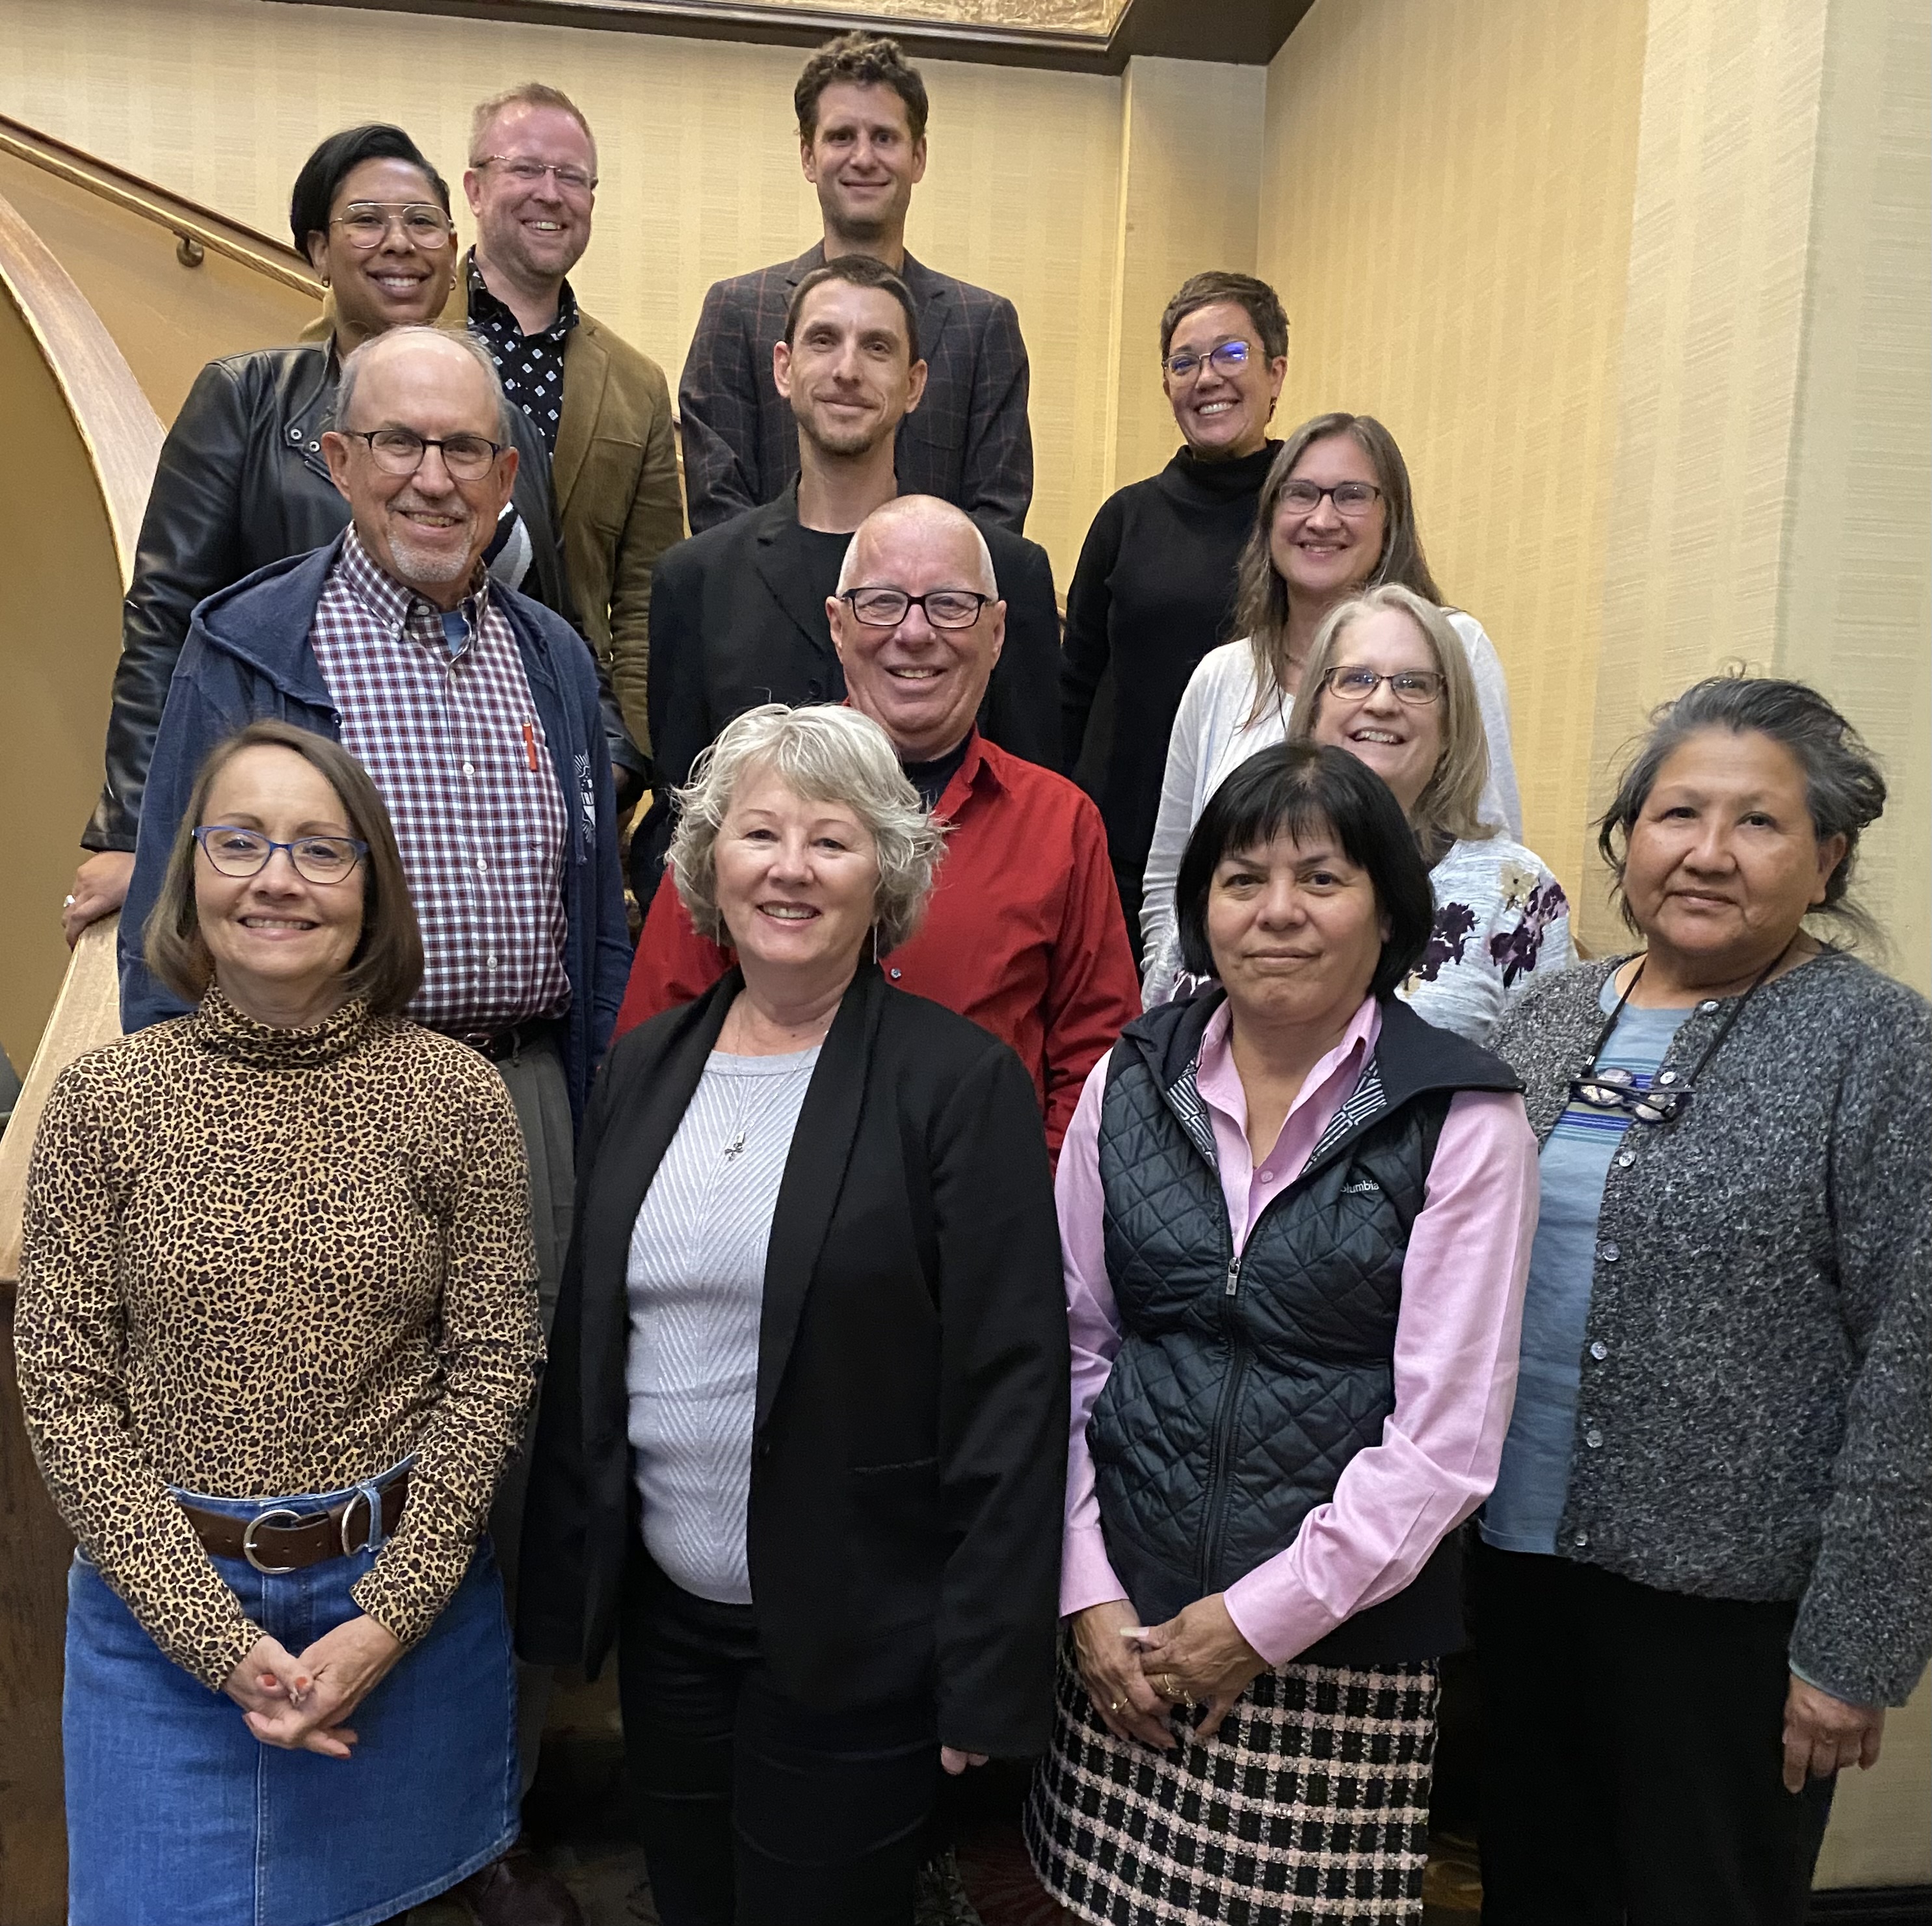 MC USA Executive Board strengthens relationships, reimagines convention